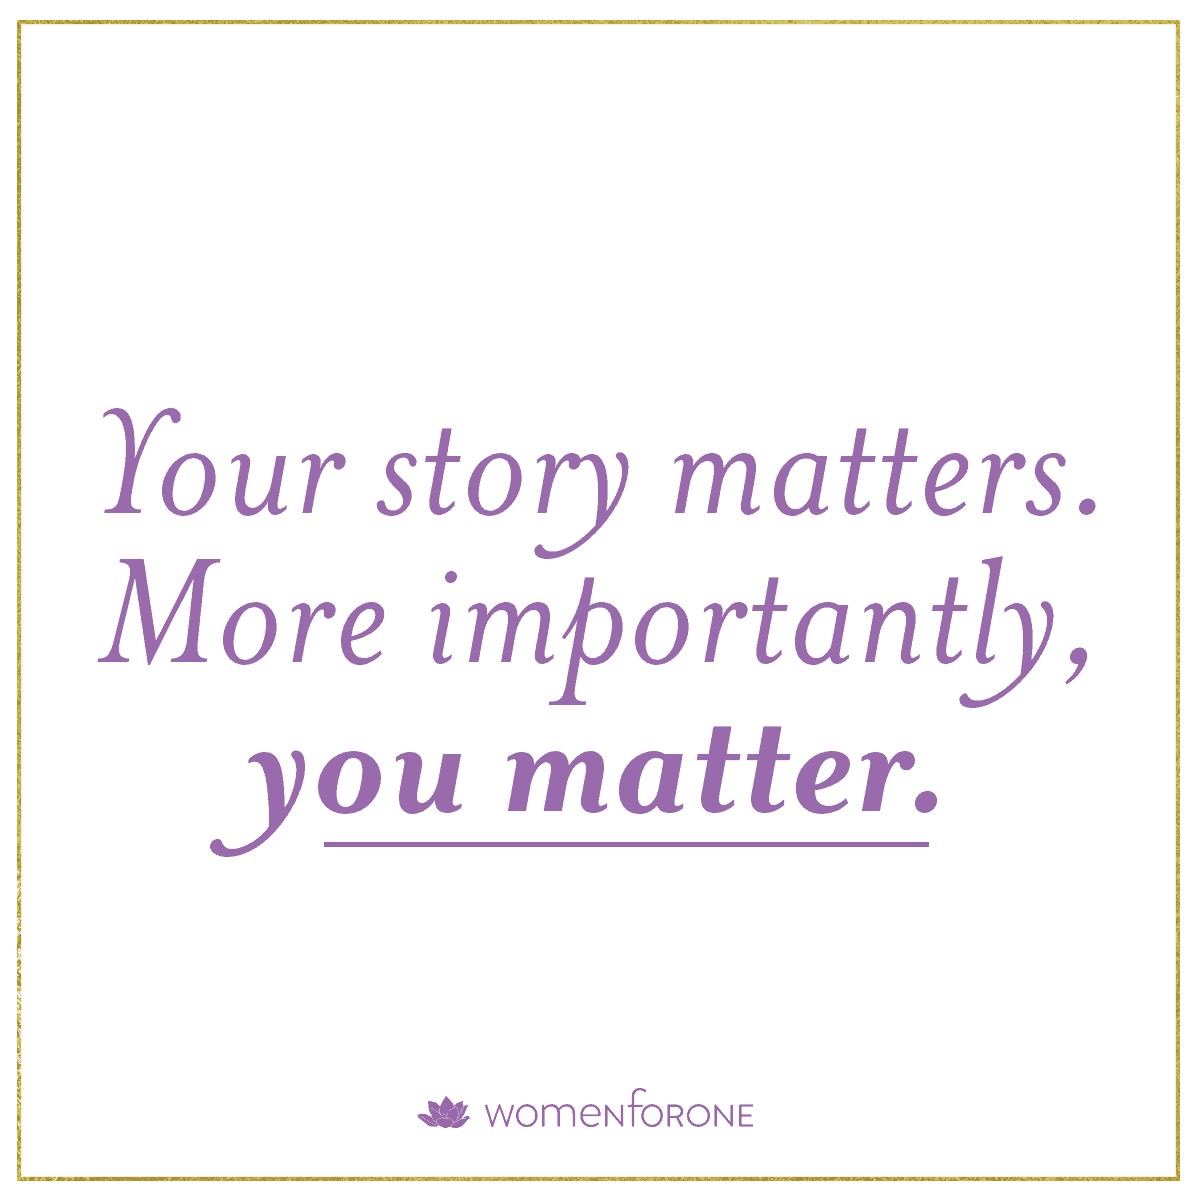 Your story matters. More importantly, you matter.